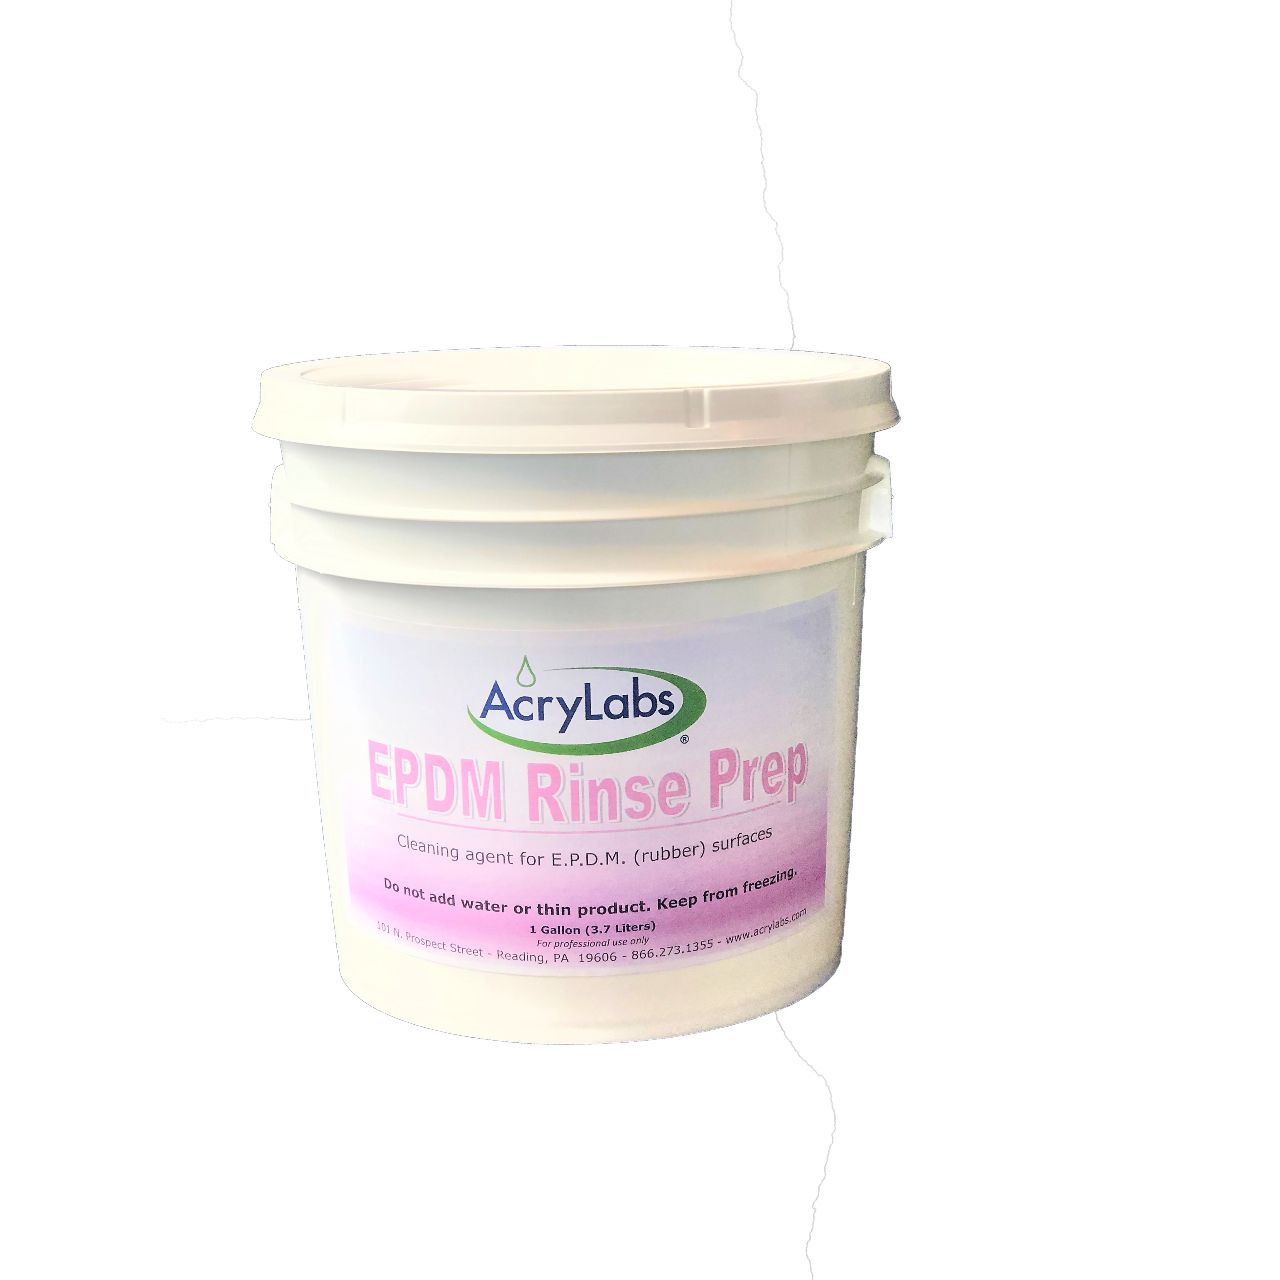 AcryLabs EPDM Rinse Prep Cleaner 5 Gallon Pail Light Pink